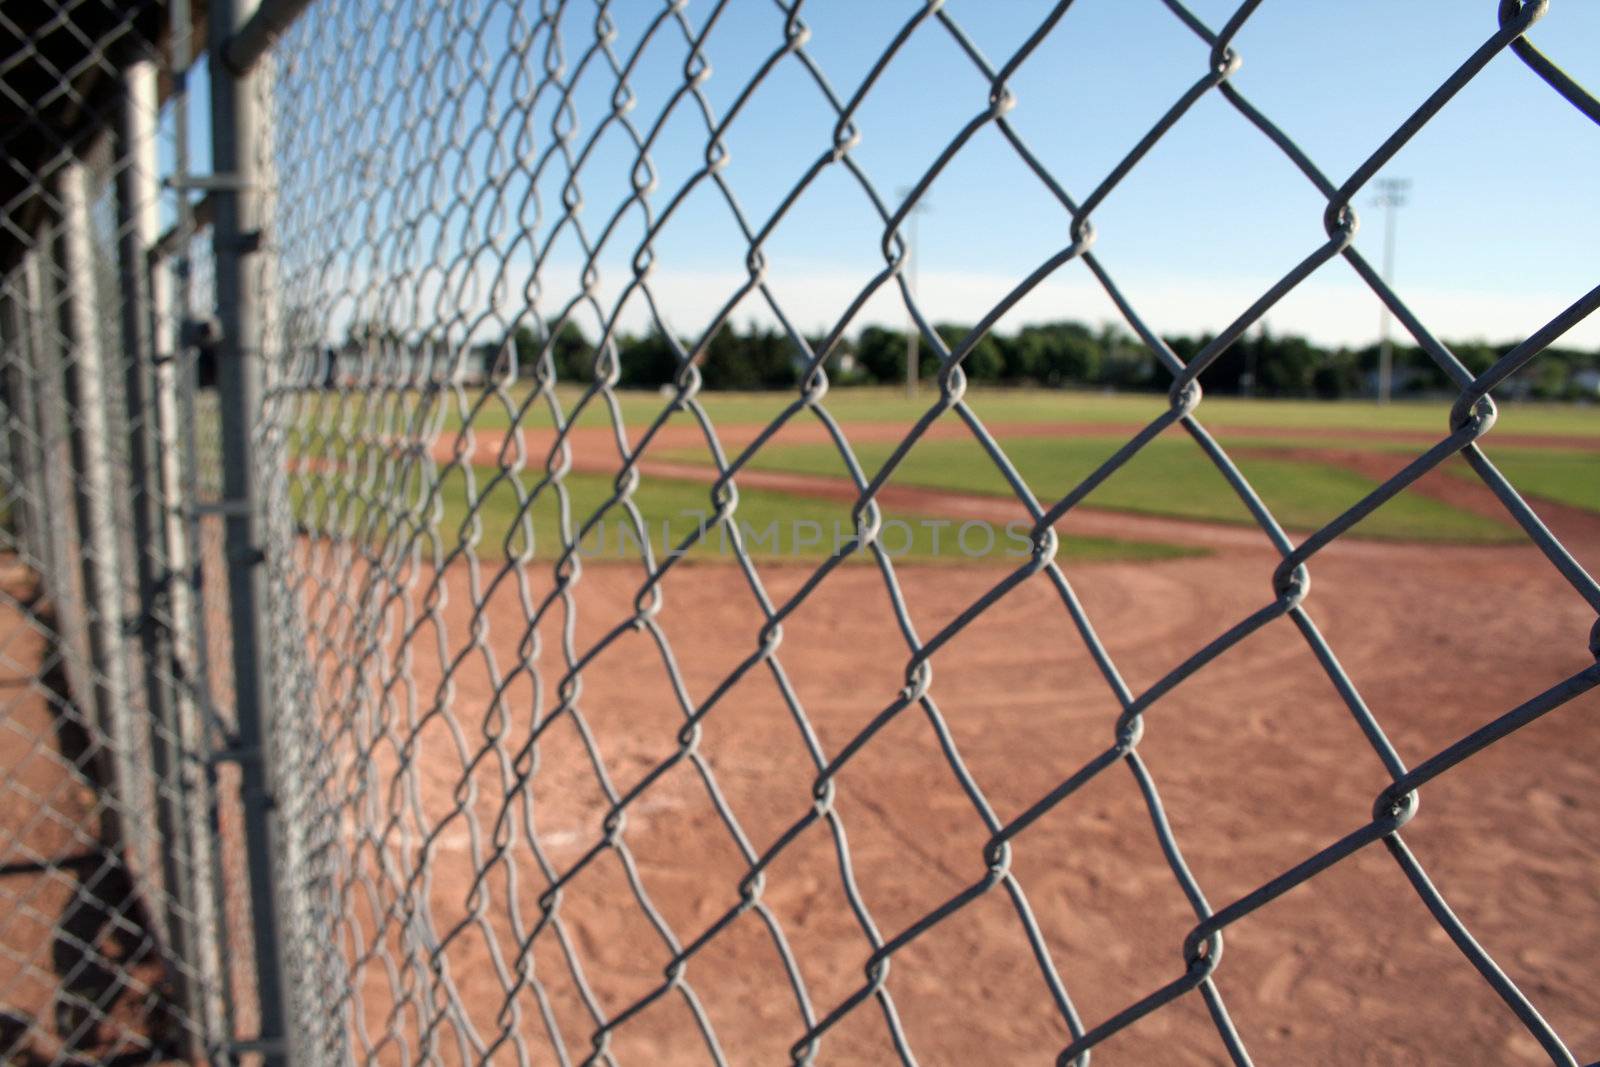 A view from behind the fence at a small baseball field.
